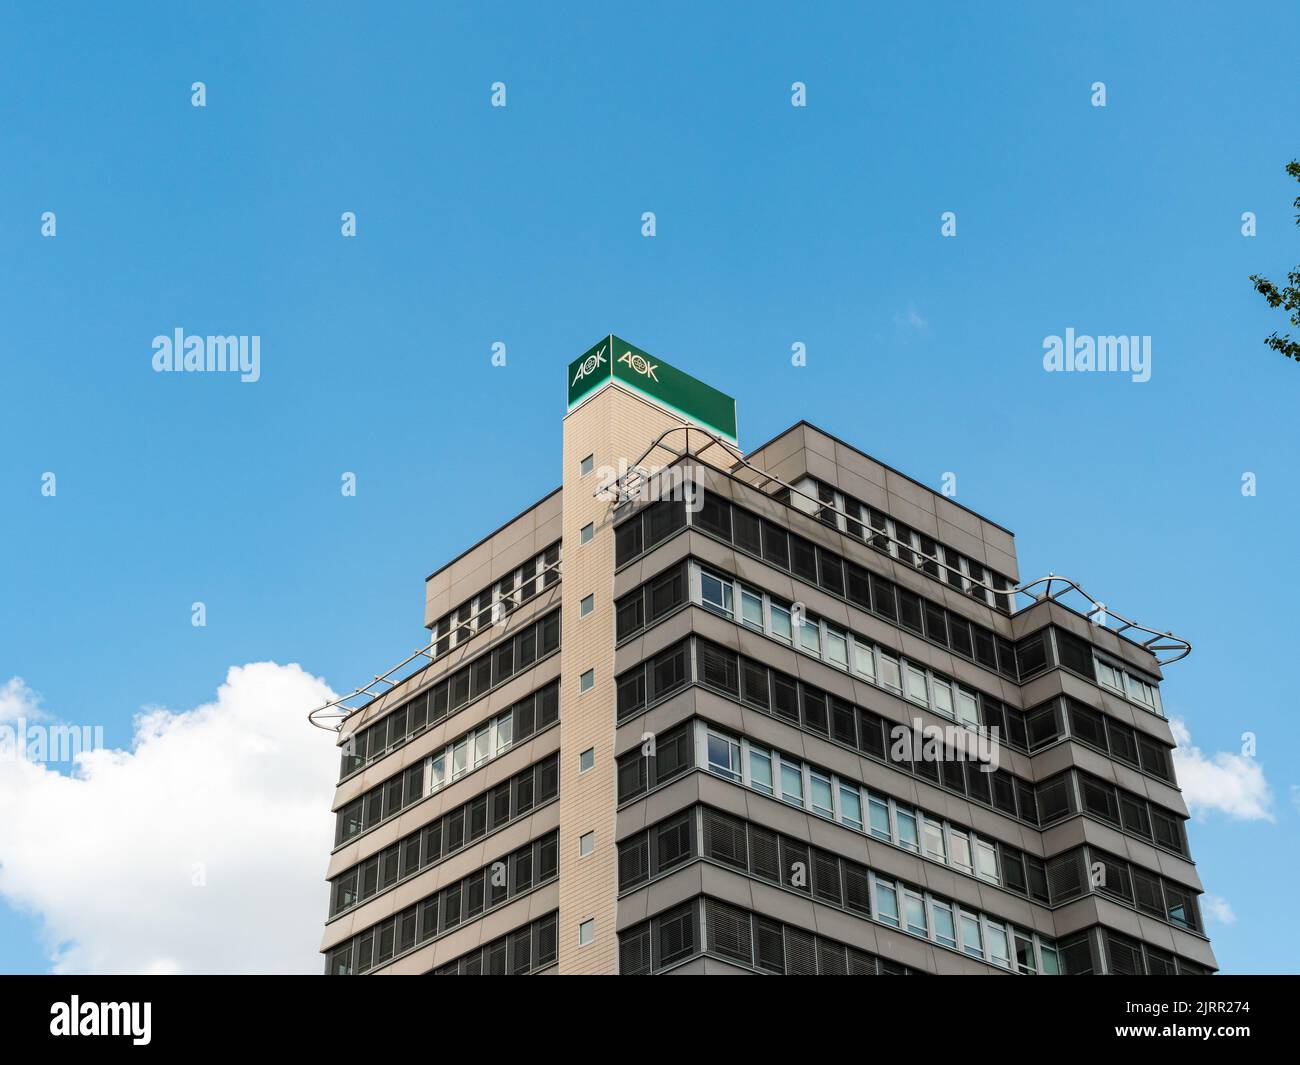 AOK German health maintenance organisation office building in the city. Public health care service. The logo sign is on top of the house exterior. Stock Photo